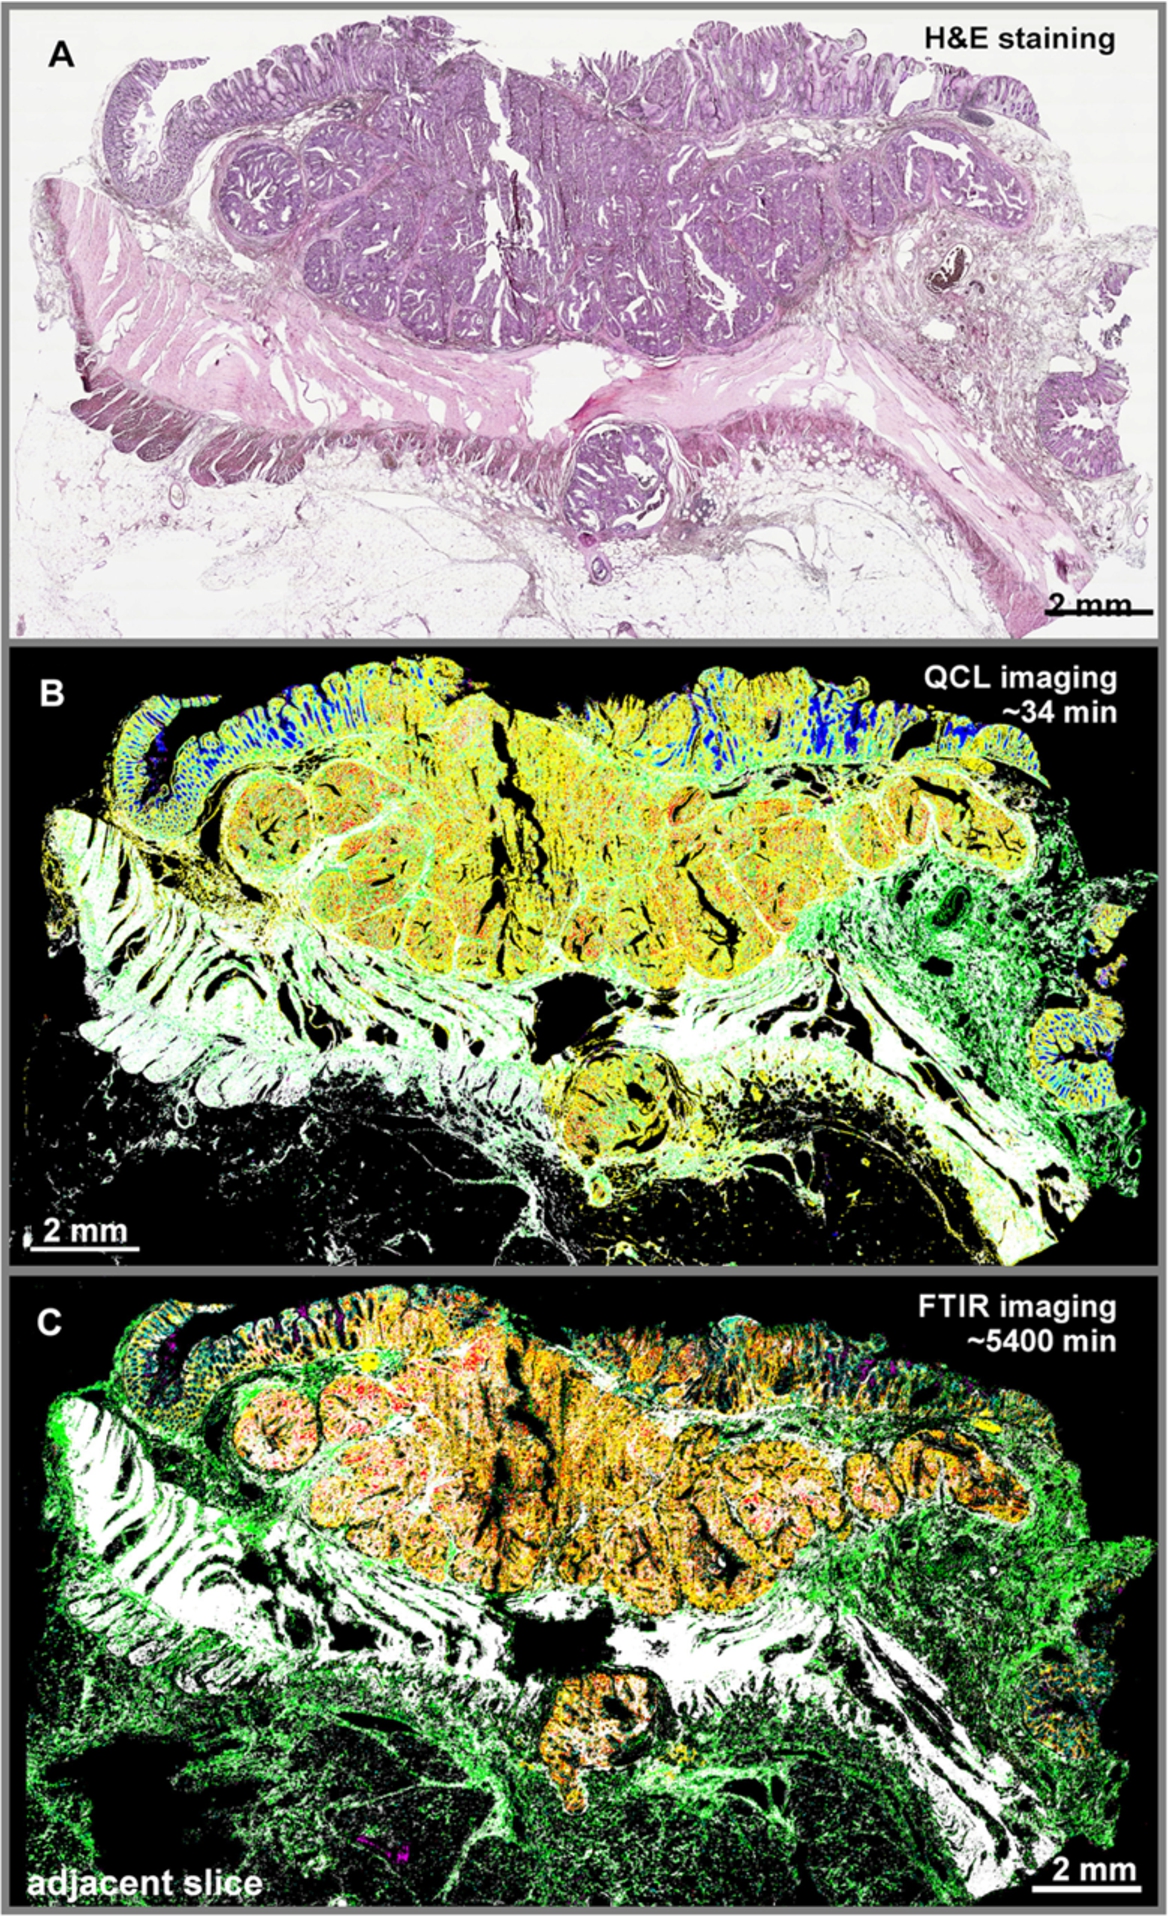 Comparison of the QCL-IR- and FTIR-based IR tissue analysis. Colorectal cancer tissue analysis using H&E staining as Gold standard (A), Spero QT system (B), and FTIR-based imaging system (C). The listed times illustrate the duration of the measurements. Red, pathological region comprising of tumorous regions and infiltrating inflammatory cells; white, muscles; green, connective tissue; cyan, crypts and blue, lumen. The comparison of the images demonstrates convincingly, that the QCL IR imaging results are in nice agreement with those obtained using the FTIR imaging. The observed deviations seem to be caused mainly by the use of an adjacent slice and the training of the FTIR classifier on samples of another study which could slightly differ in sample handling and processing. Furthermore, the previously FTIR classifier is performing the classification in one-step which is less accurate by means of tumor detection. While the improved classifier for the QCL imaging recognizes infiltrating inflammatory cells in the first level random forest (RF) and cancerous regions in the second level RF which allows a much more accurate classification This figure was previously published in the supplement of a paper by Kuepper, Kallenbach-Thieltges et al. [20].